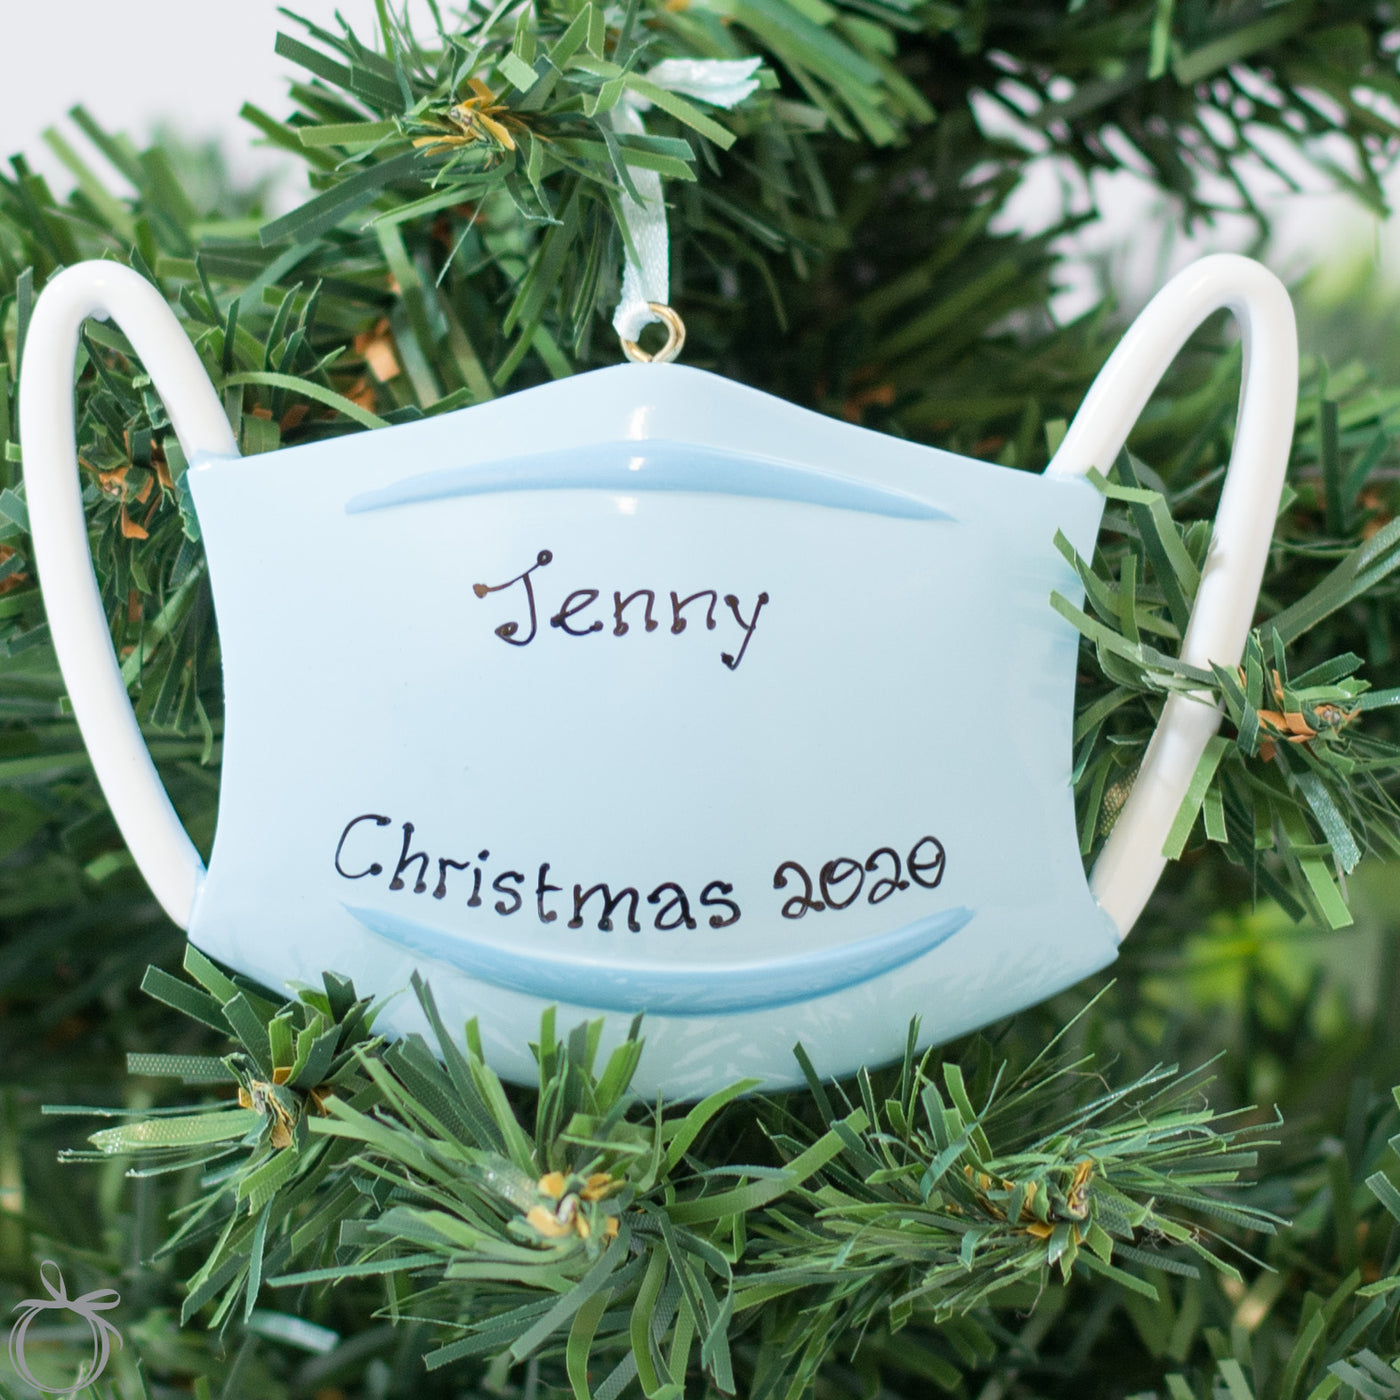 Personalised Christmas Decorations - Wear a Mask - WowWee.ie Personalised Gifts